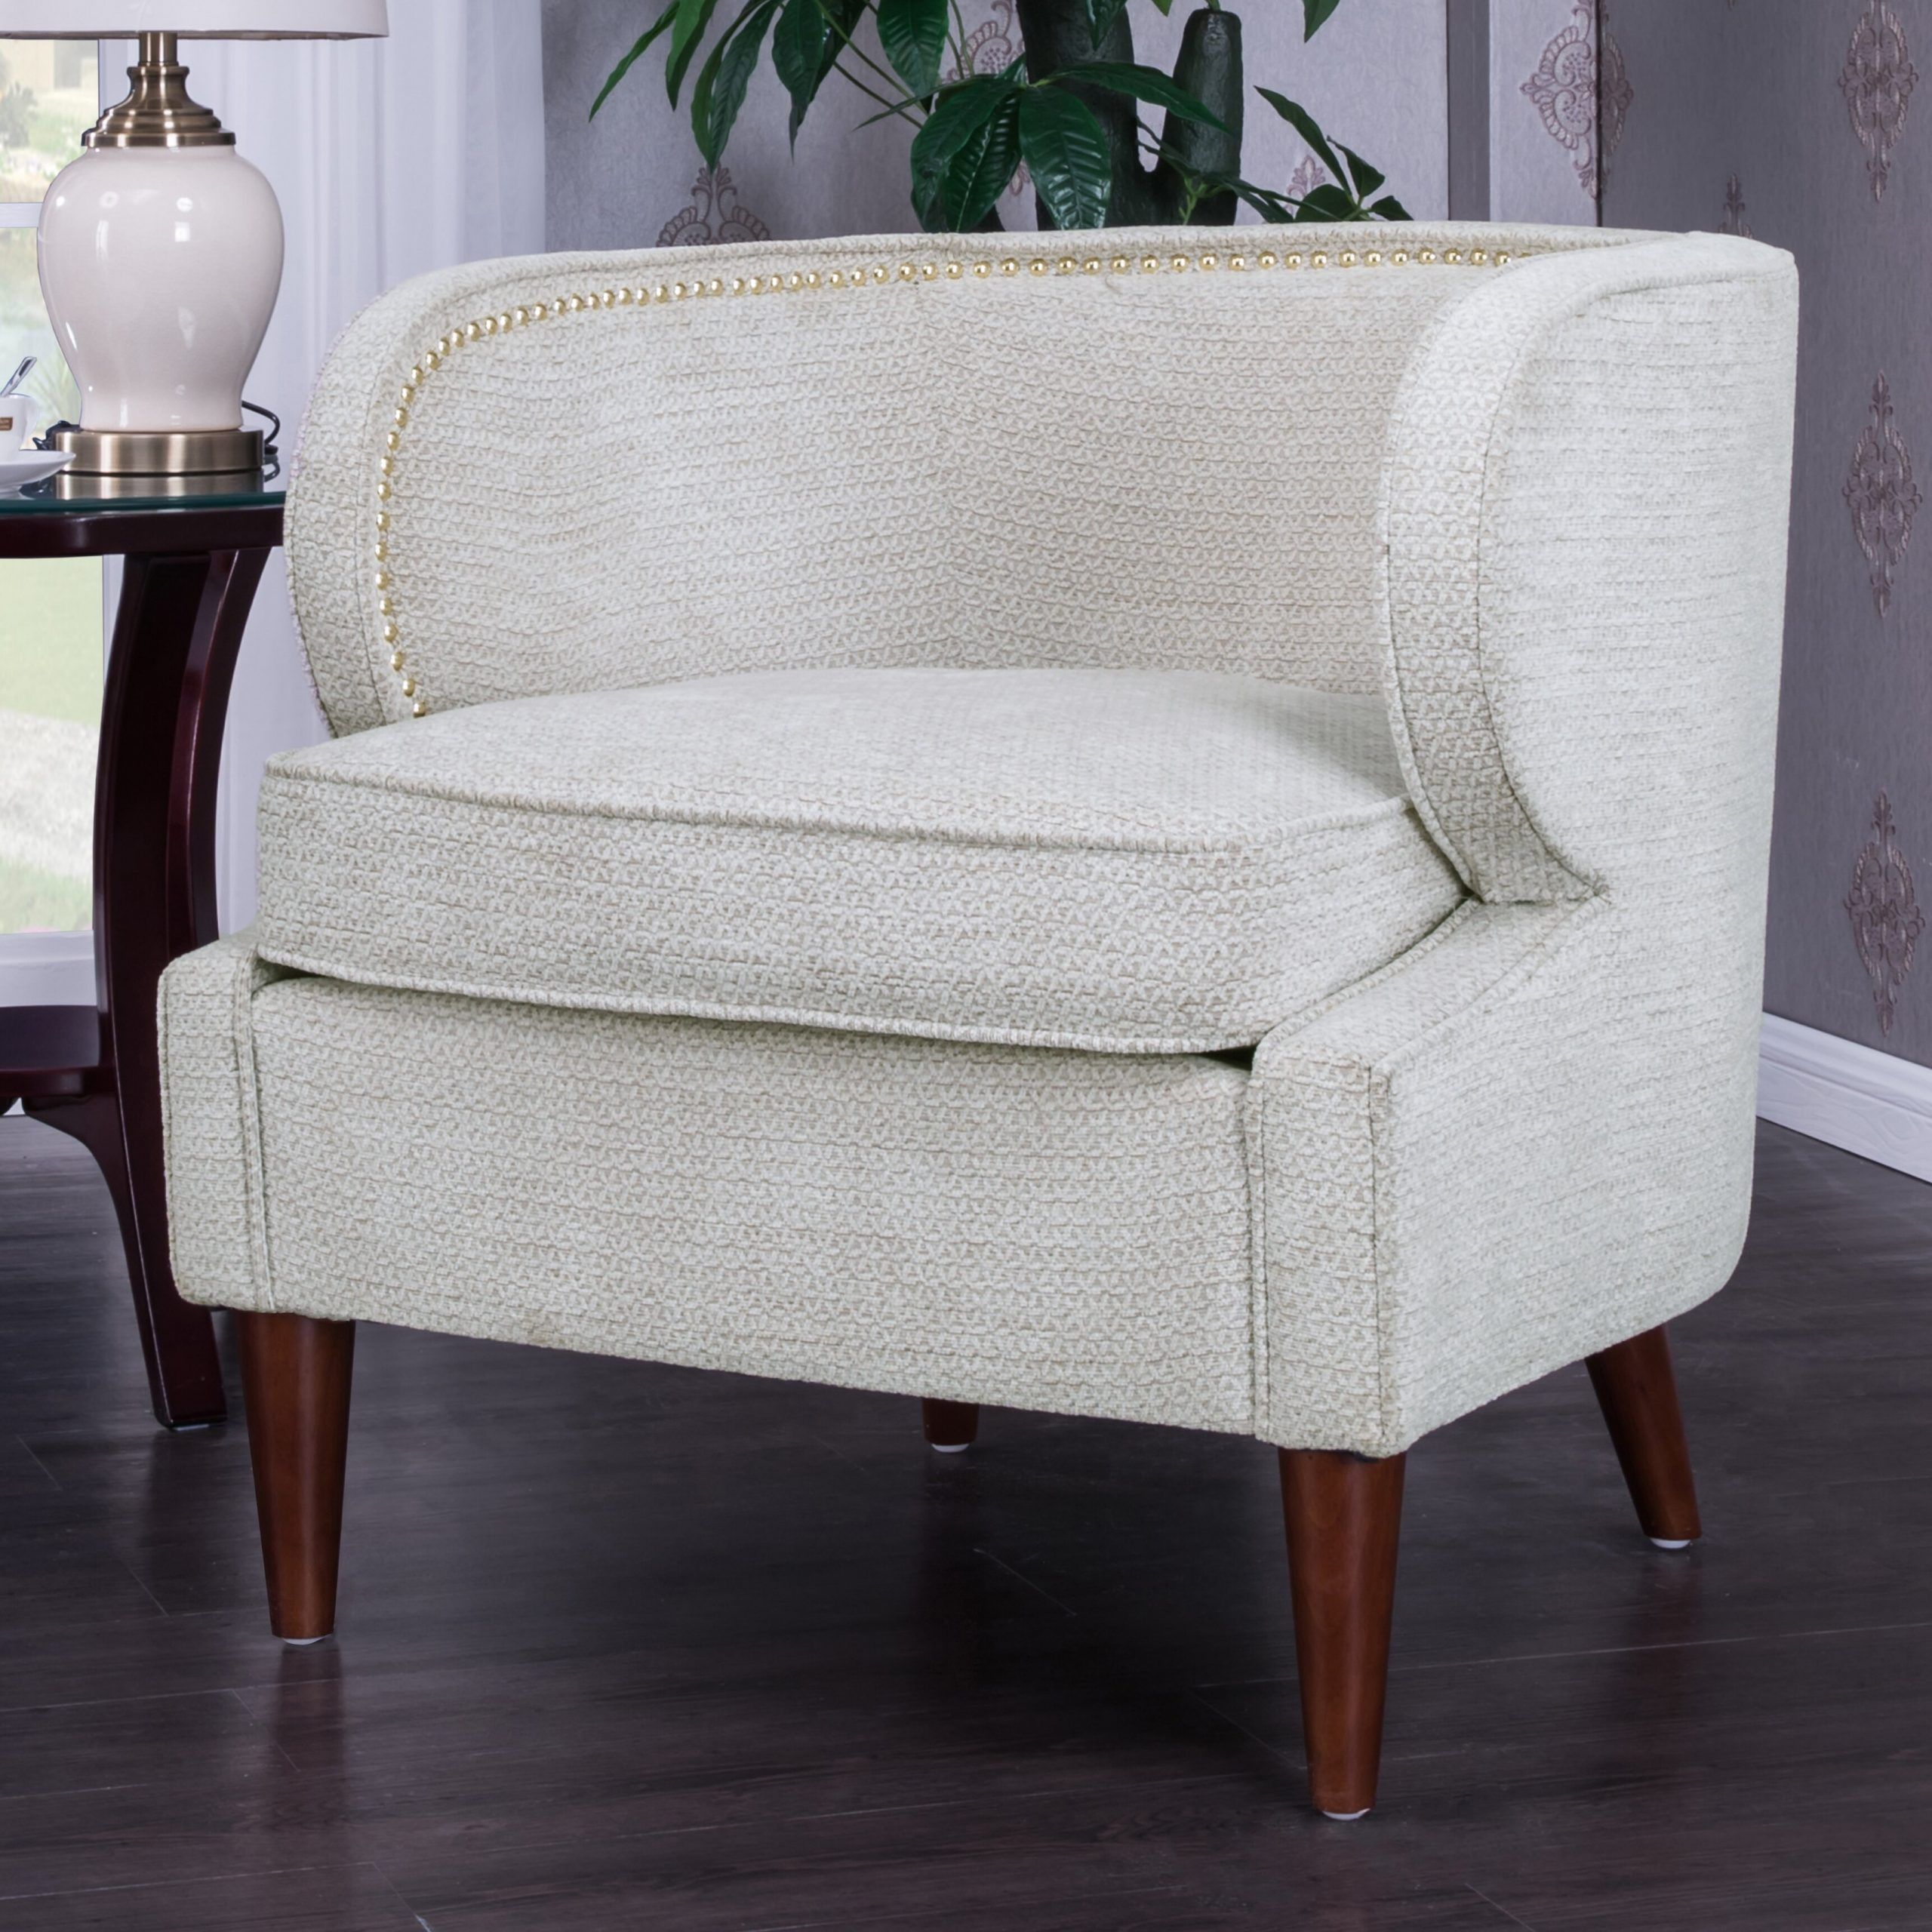 Landisville Barrel Chair Throughout Liston Faux Leather Barrel Chairs (View 11 of 15)